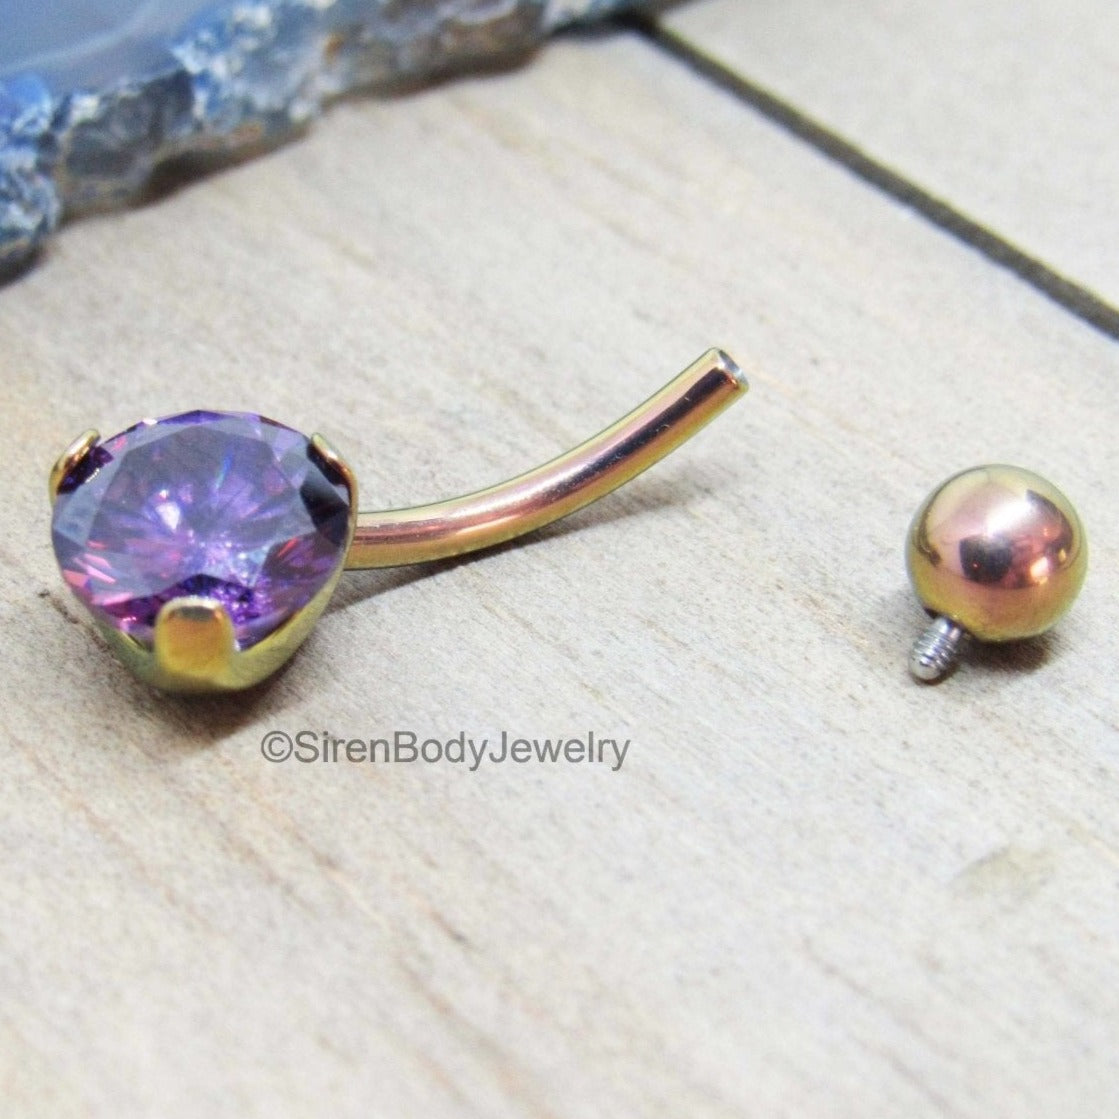 14g titanium belly button piercing ring purple gemstone rose gold anodized